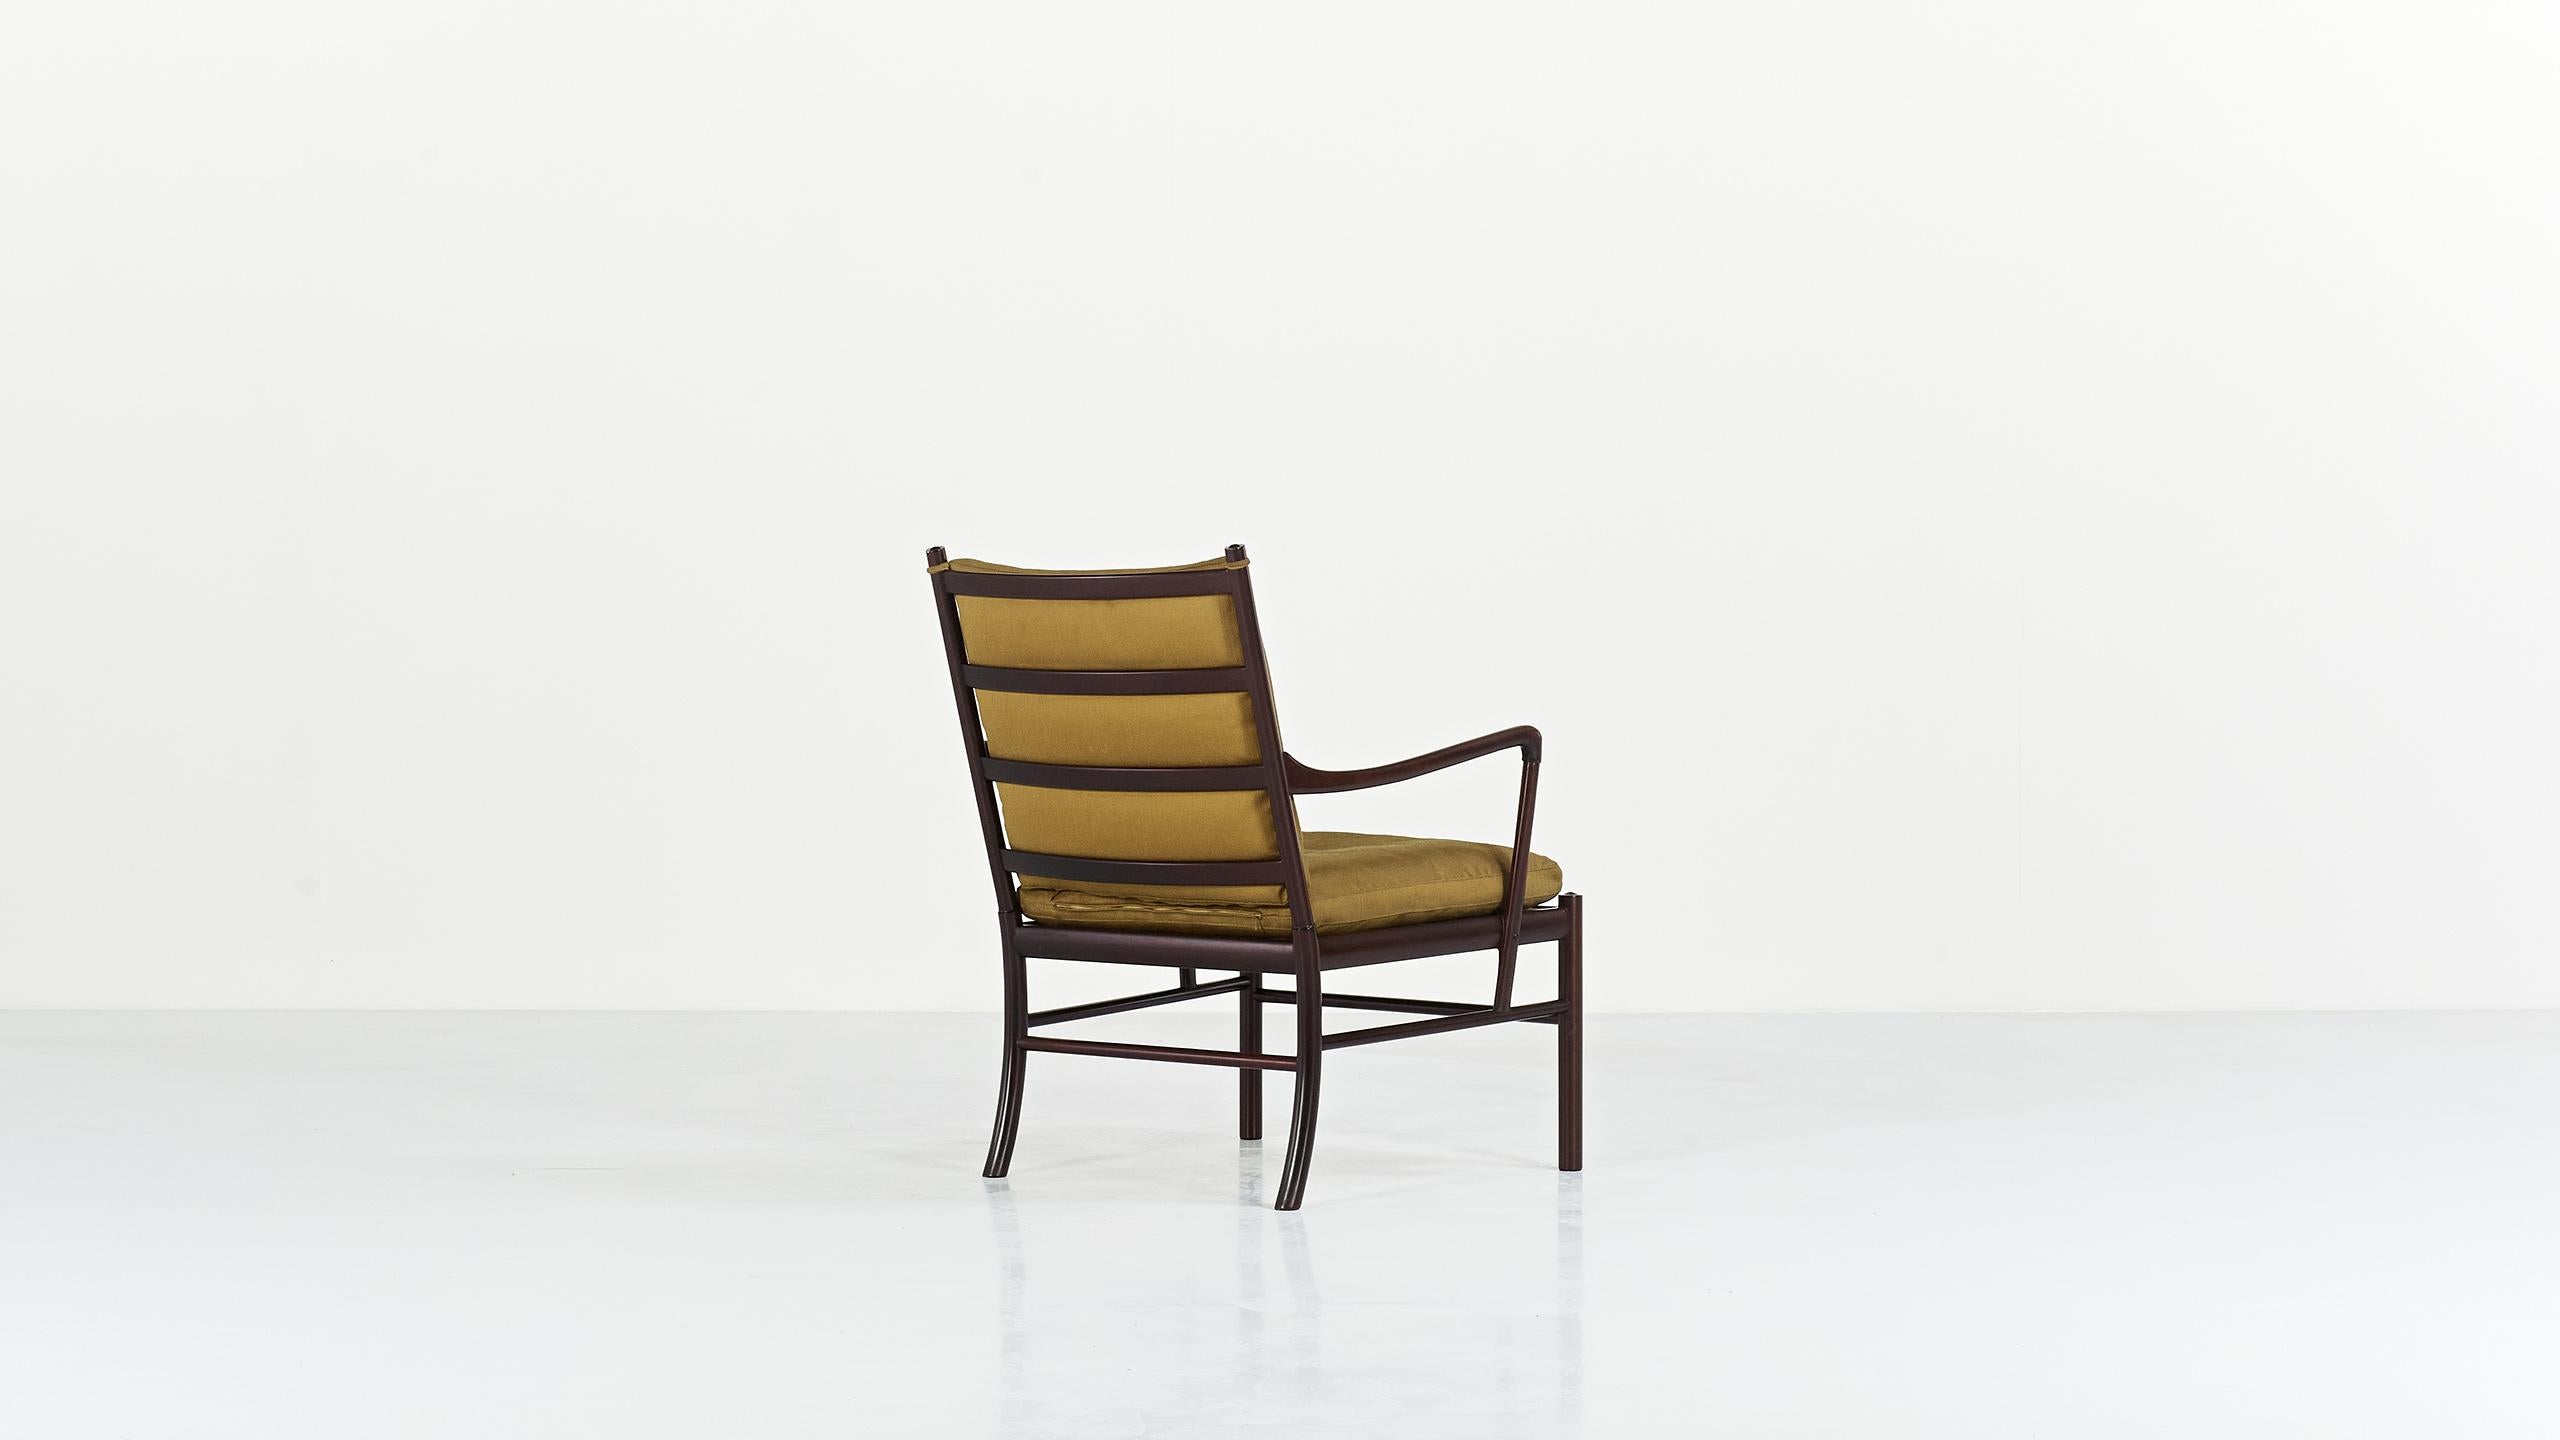 Varnished Ole Wanscher, Pair of PJ 149 Armchair for Poul Jeppesen